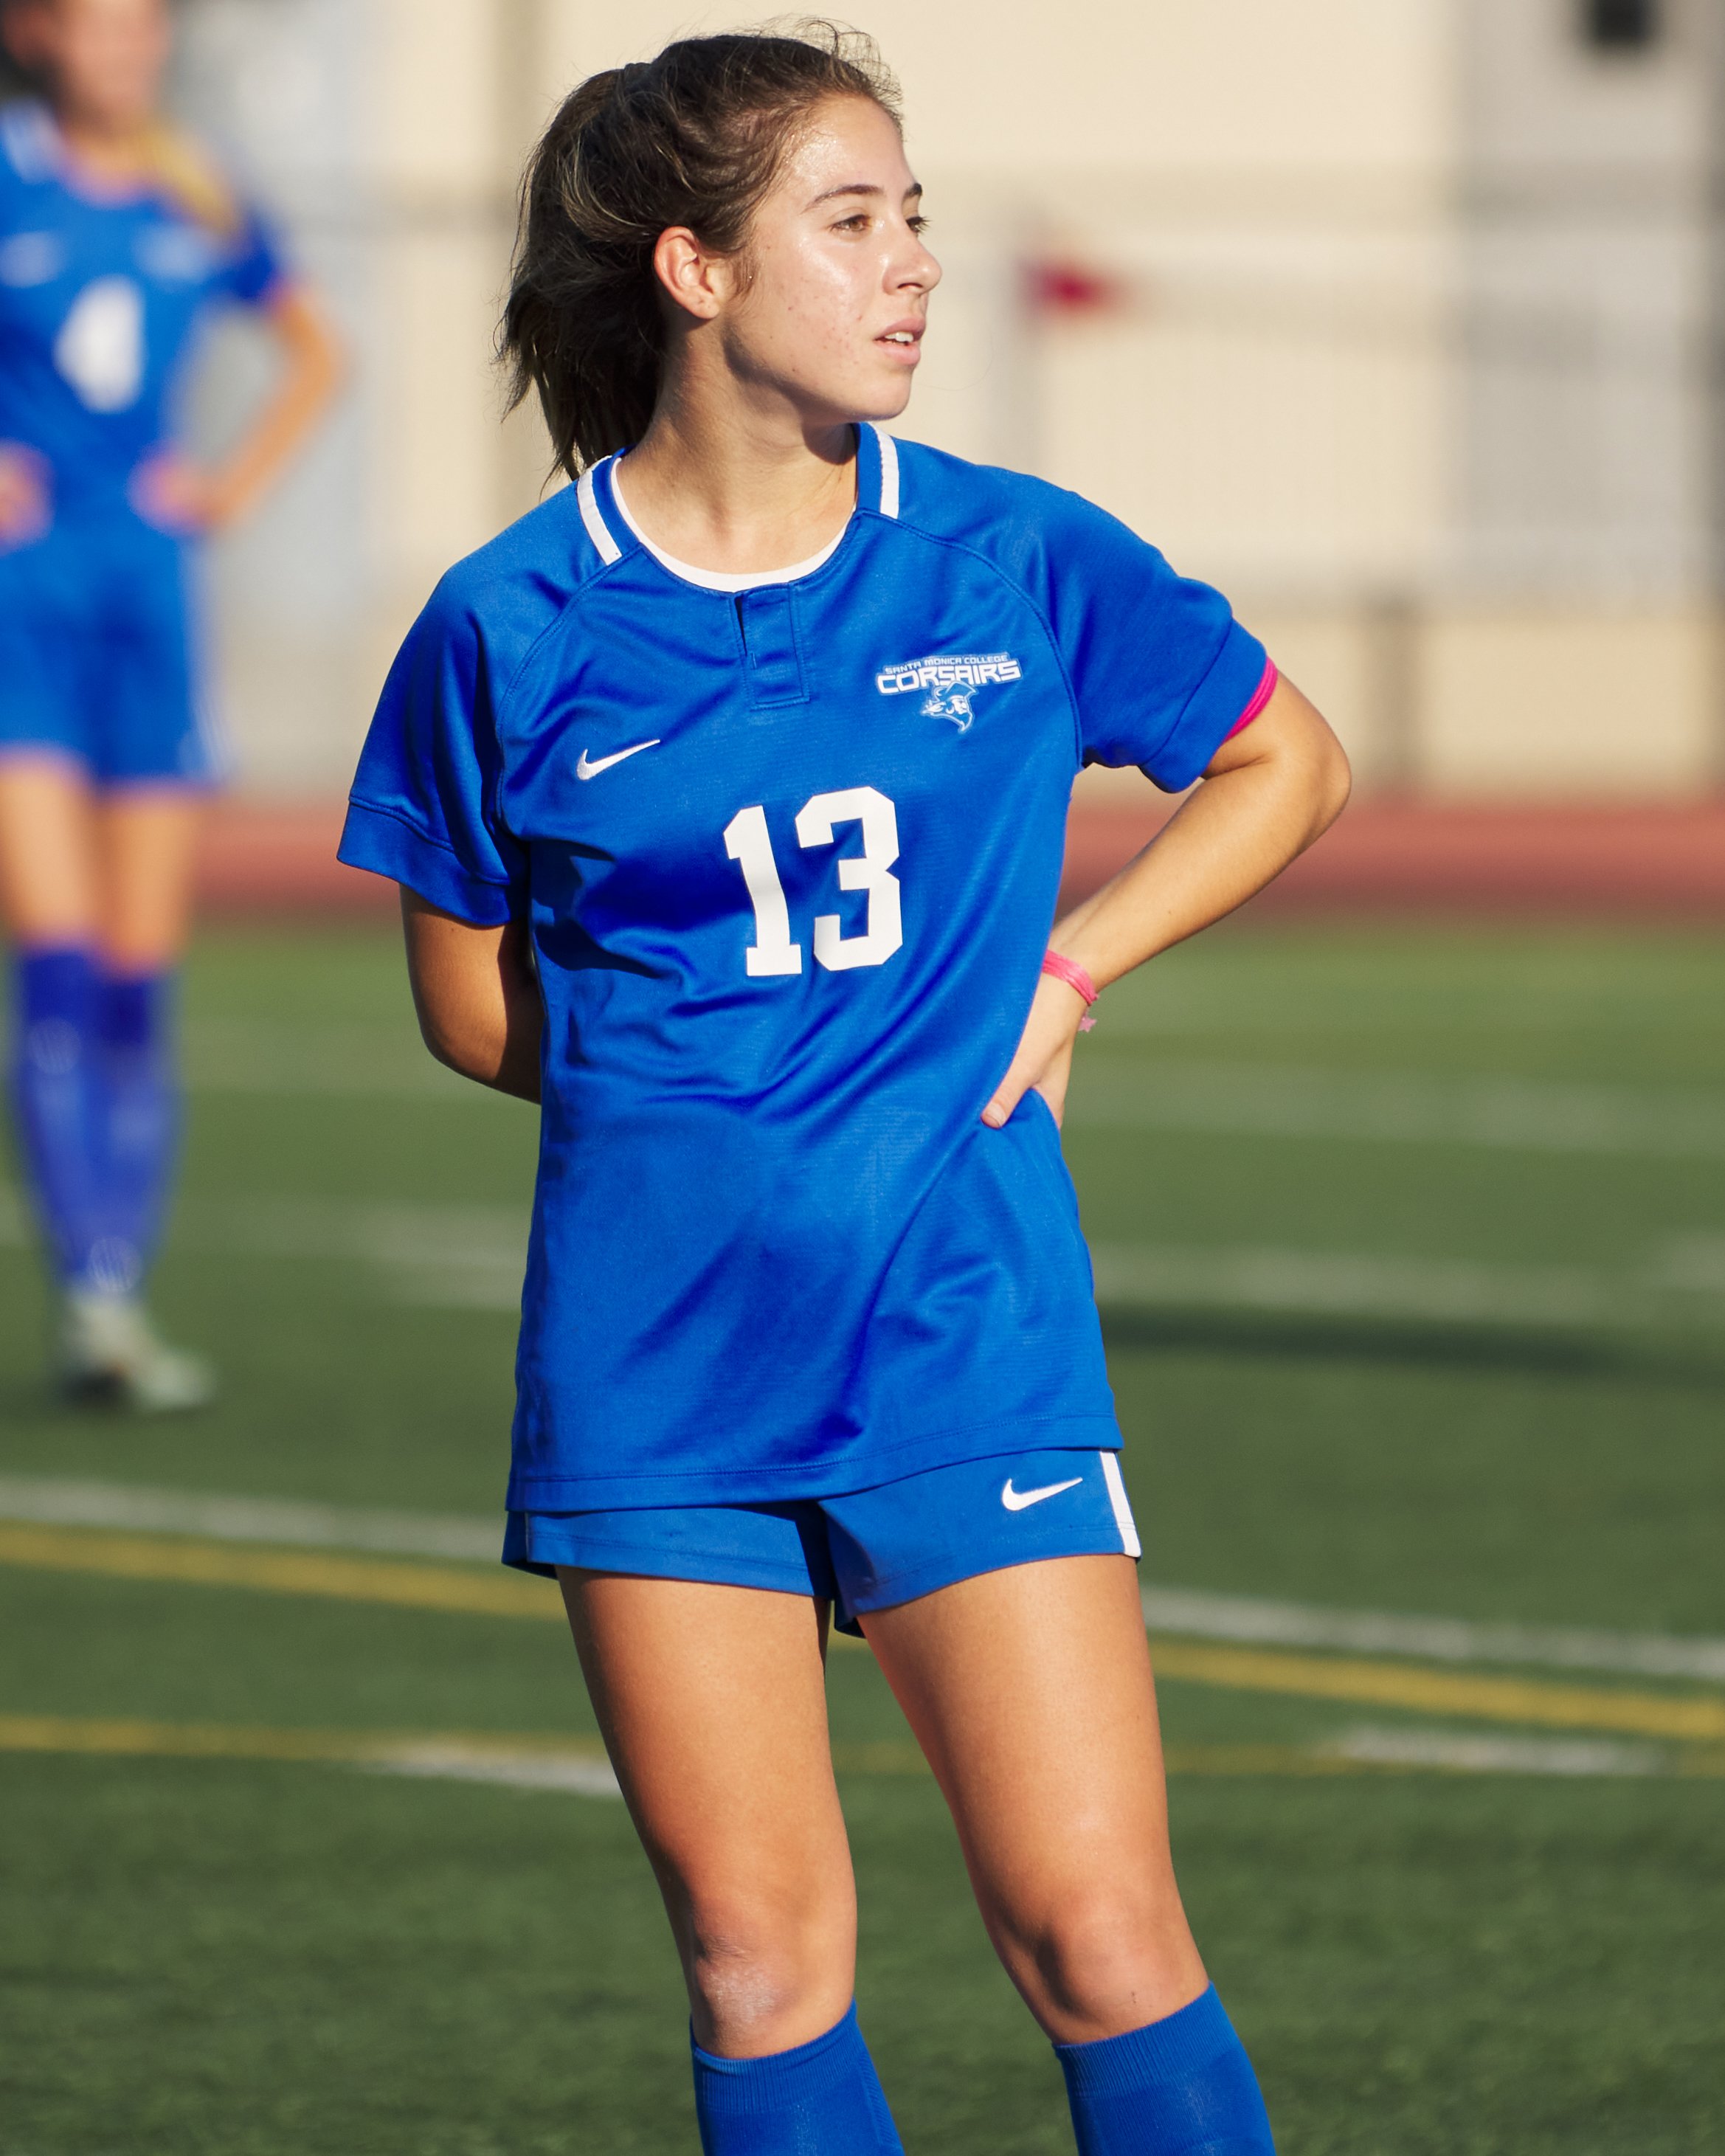  Santa Monica College Corsairs' Sophie Doumitt during the women's soccer match against the College of the Canyons Cougars on Thursday, Nov. 10, 2022, at Corsair Field in Santa Monica, Calif. The Corsairs lost 3-0. (Nicholas McCall | The Corsair) 